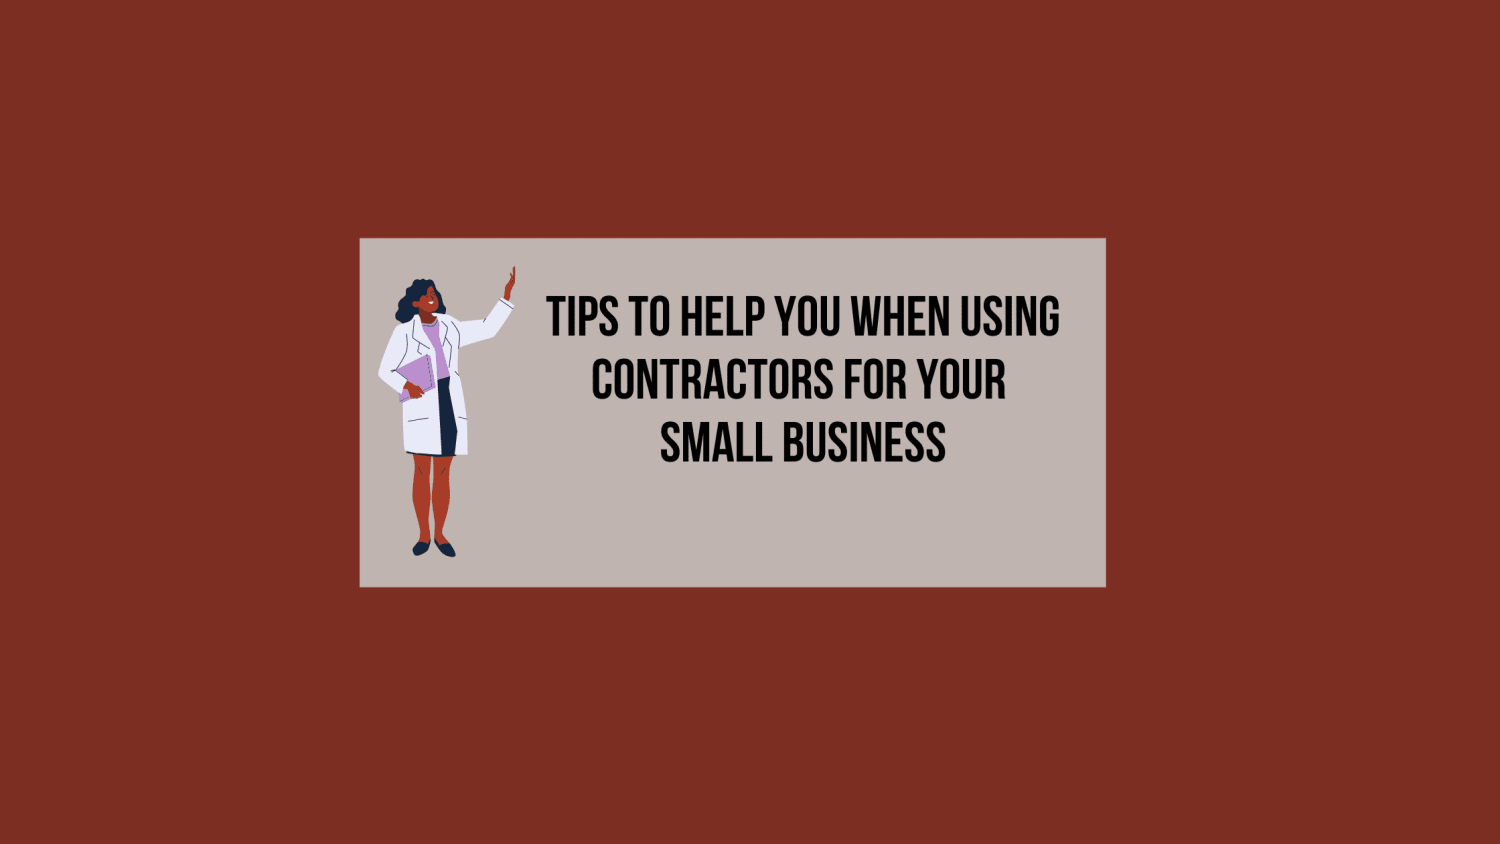 Tips to Help You When Using Contractors for Your Small Business